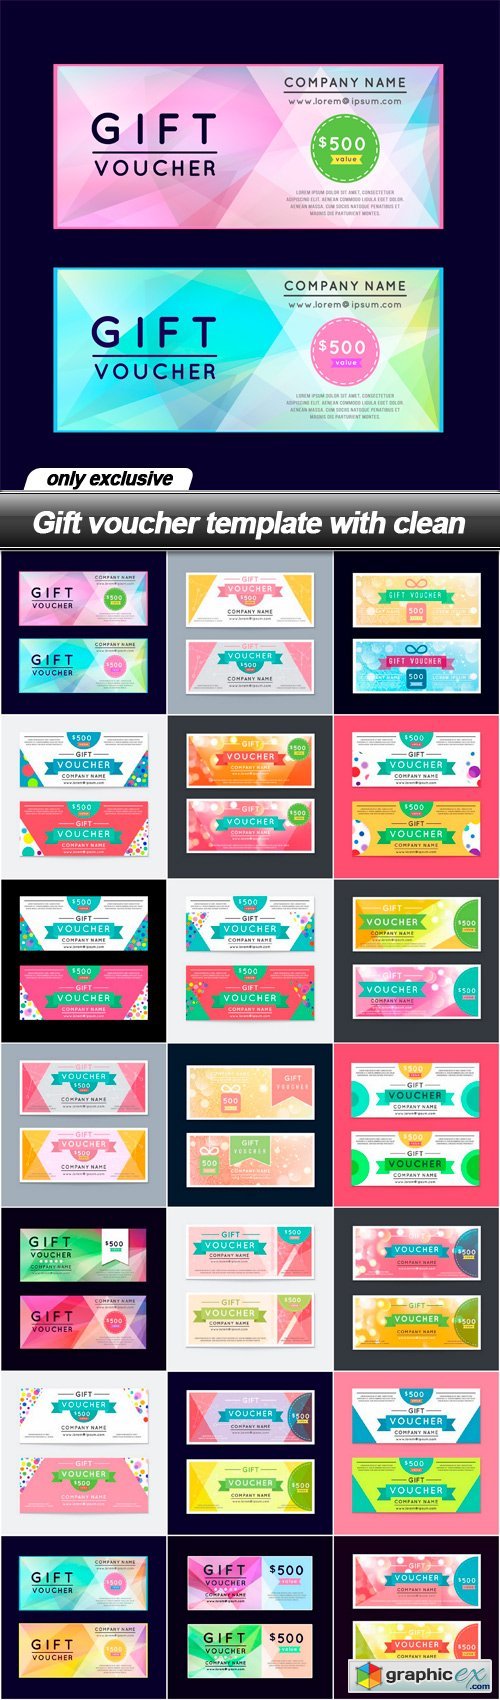 Gift voucher template with clean - 21 EPS